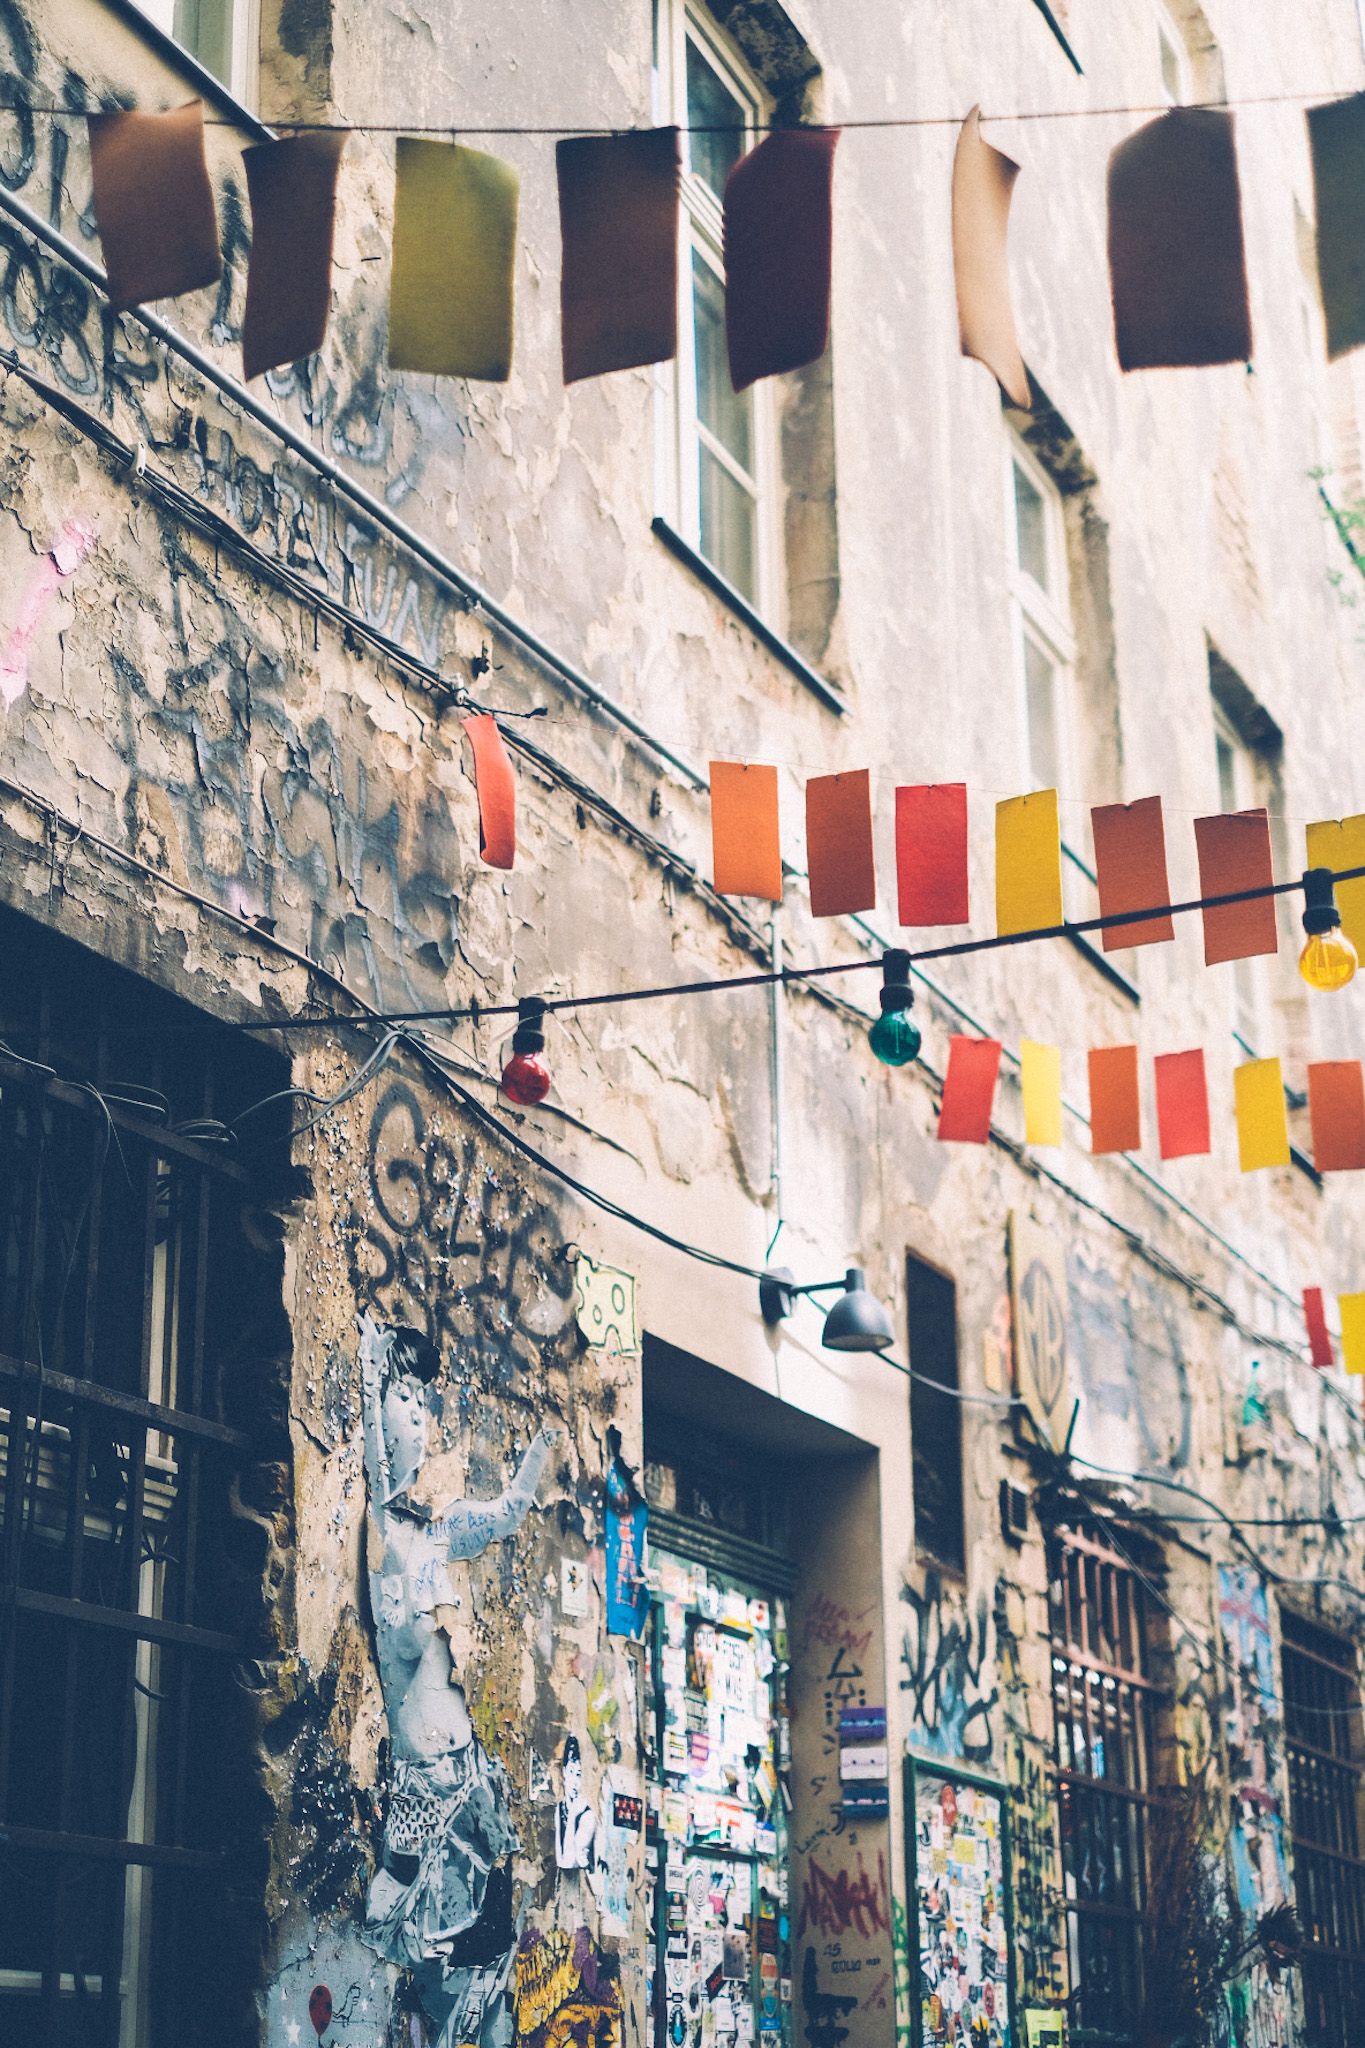 Little square pennant flags in warm colors hang in rows above a courtyard, the wall behind them filled with graffiti.